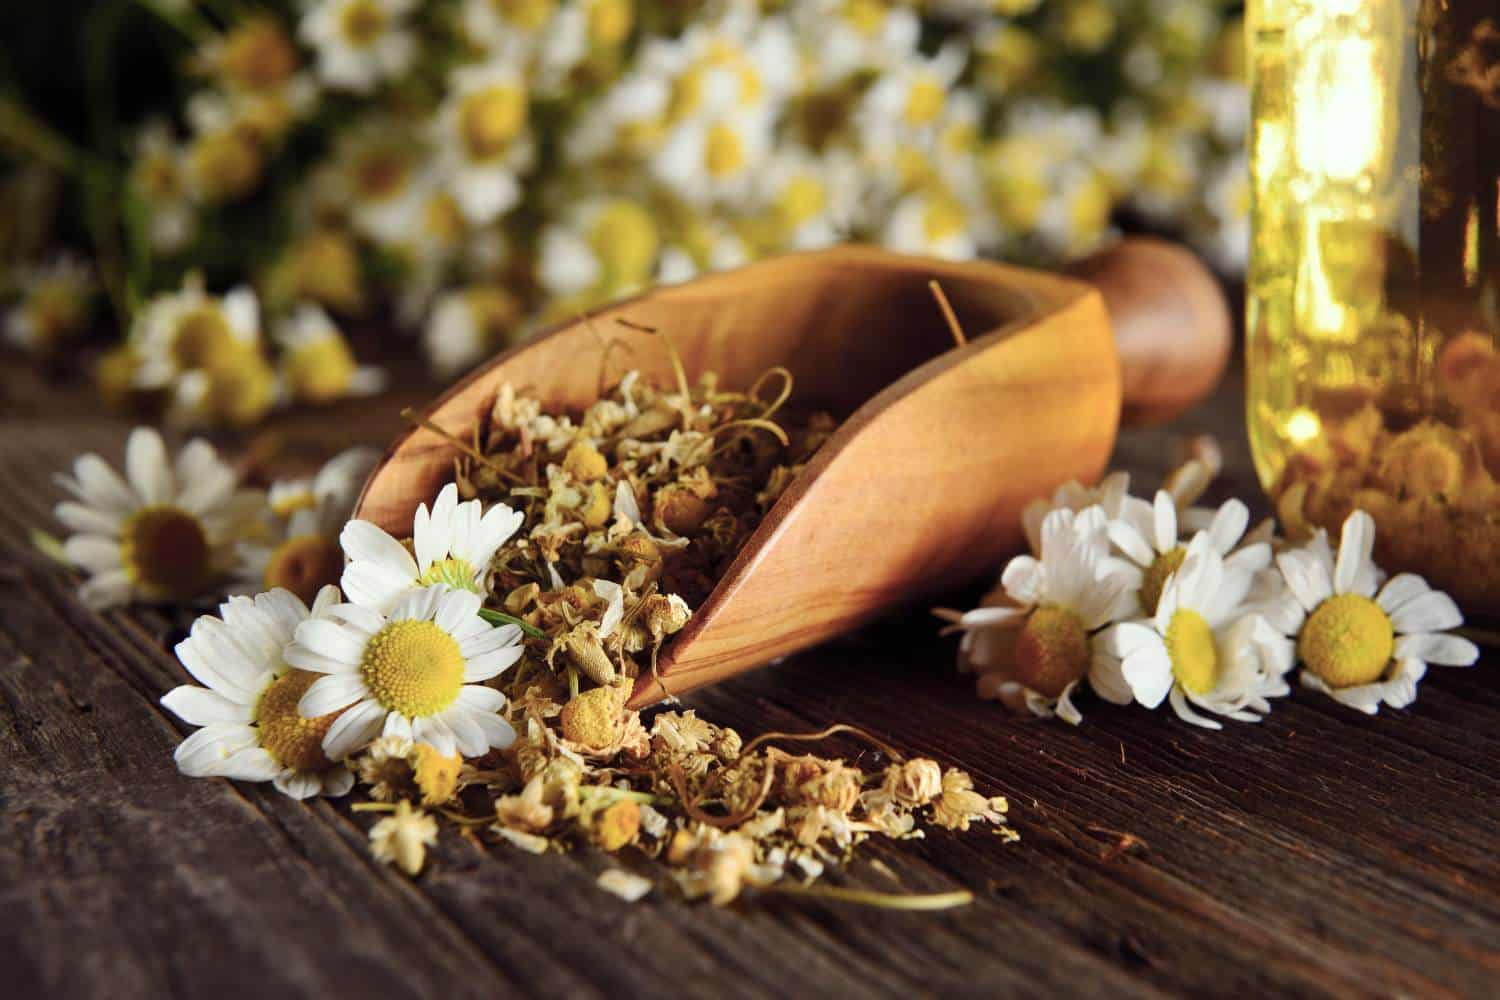 Chamomile and daisies on a wooden table.